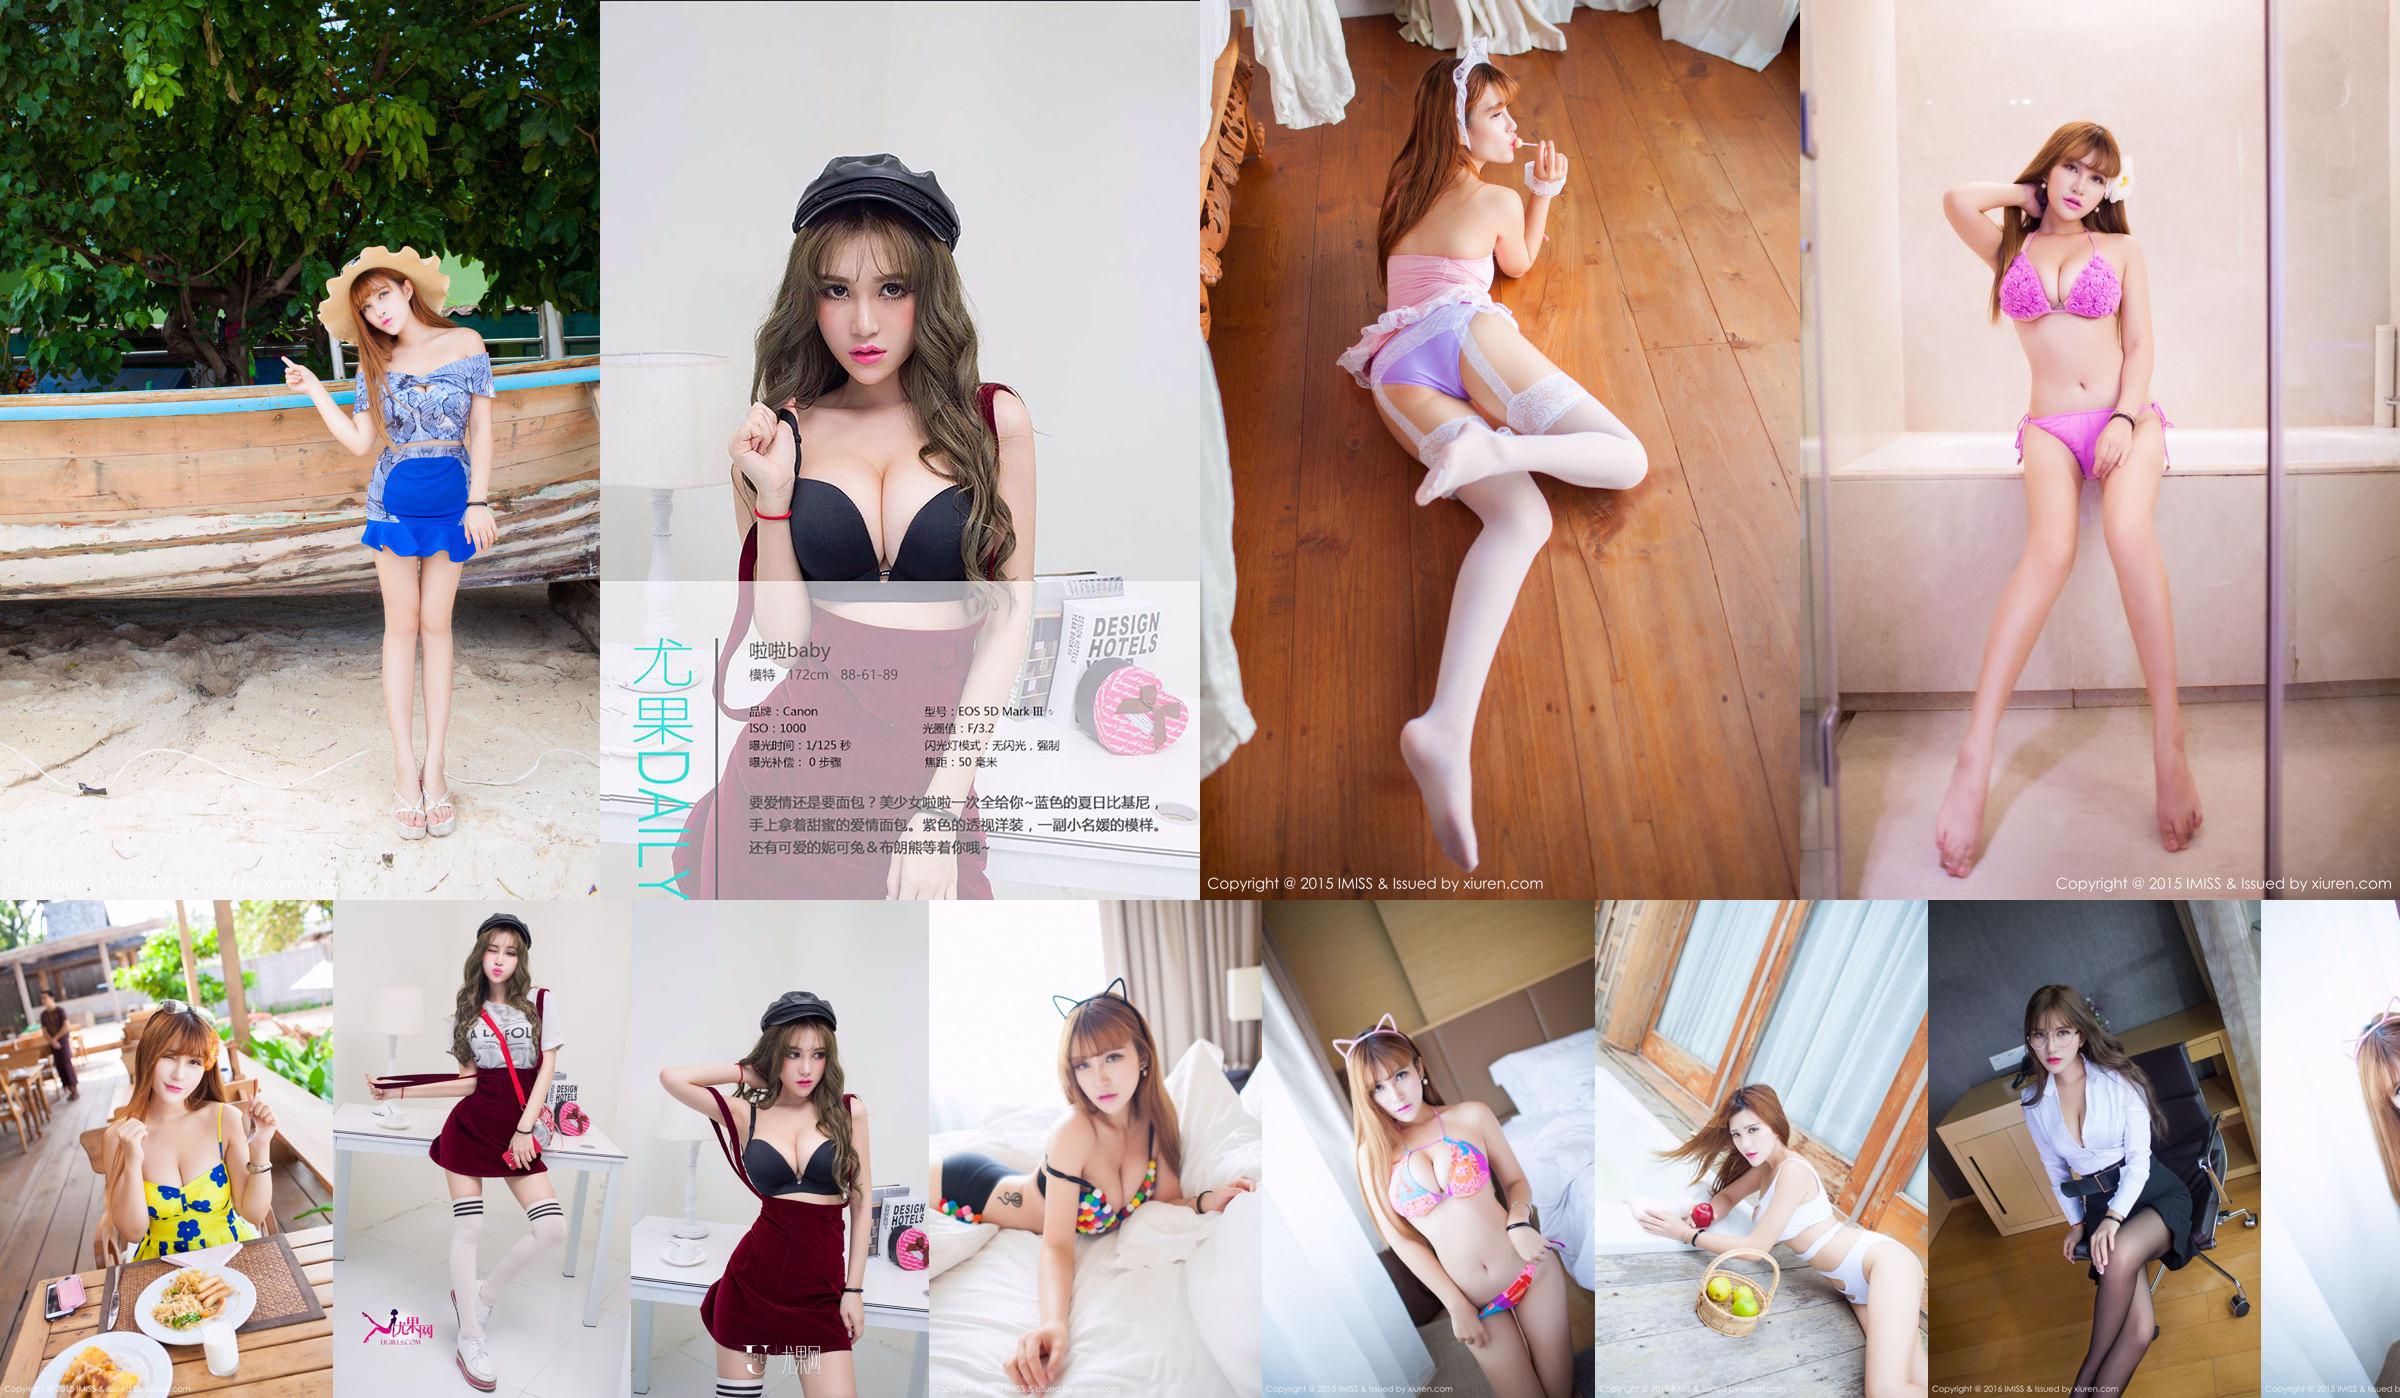 LalaBaby Lala "Two sets of underwear + nurse outfit + OL outfit" [爱蜜社IMiss] Vol.116 No.0705da Page 35